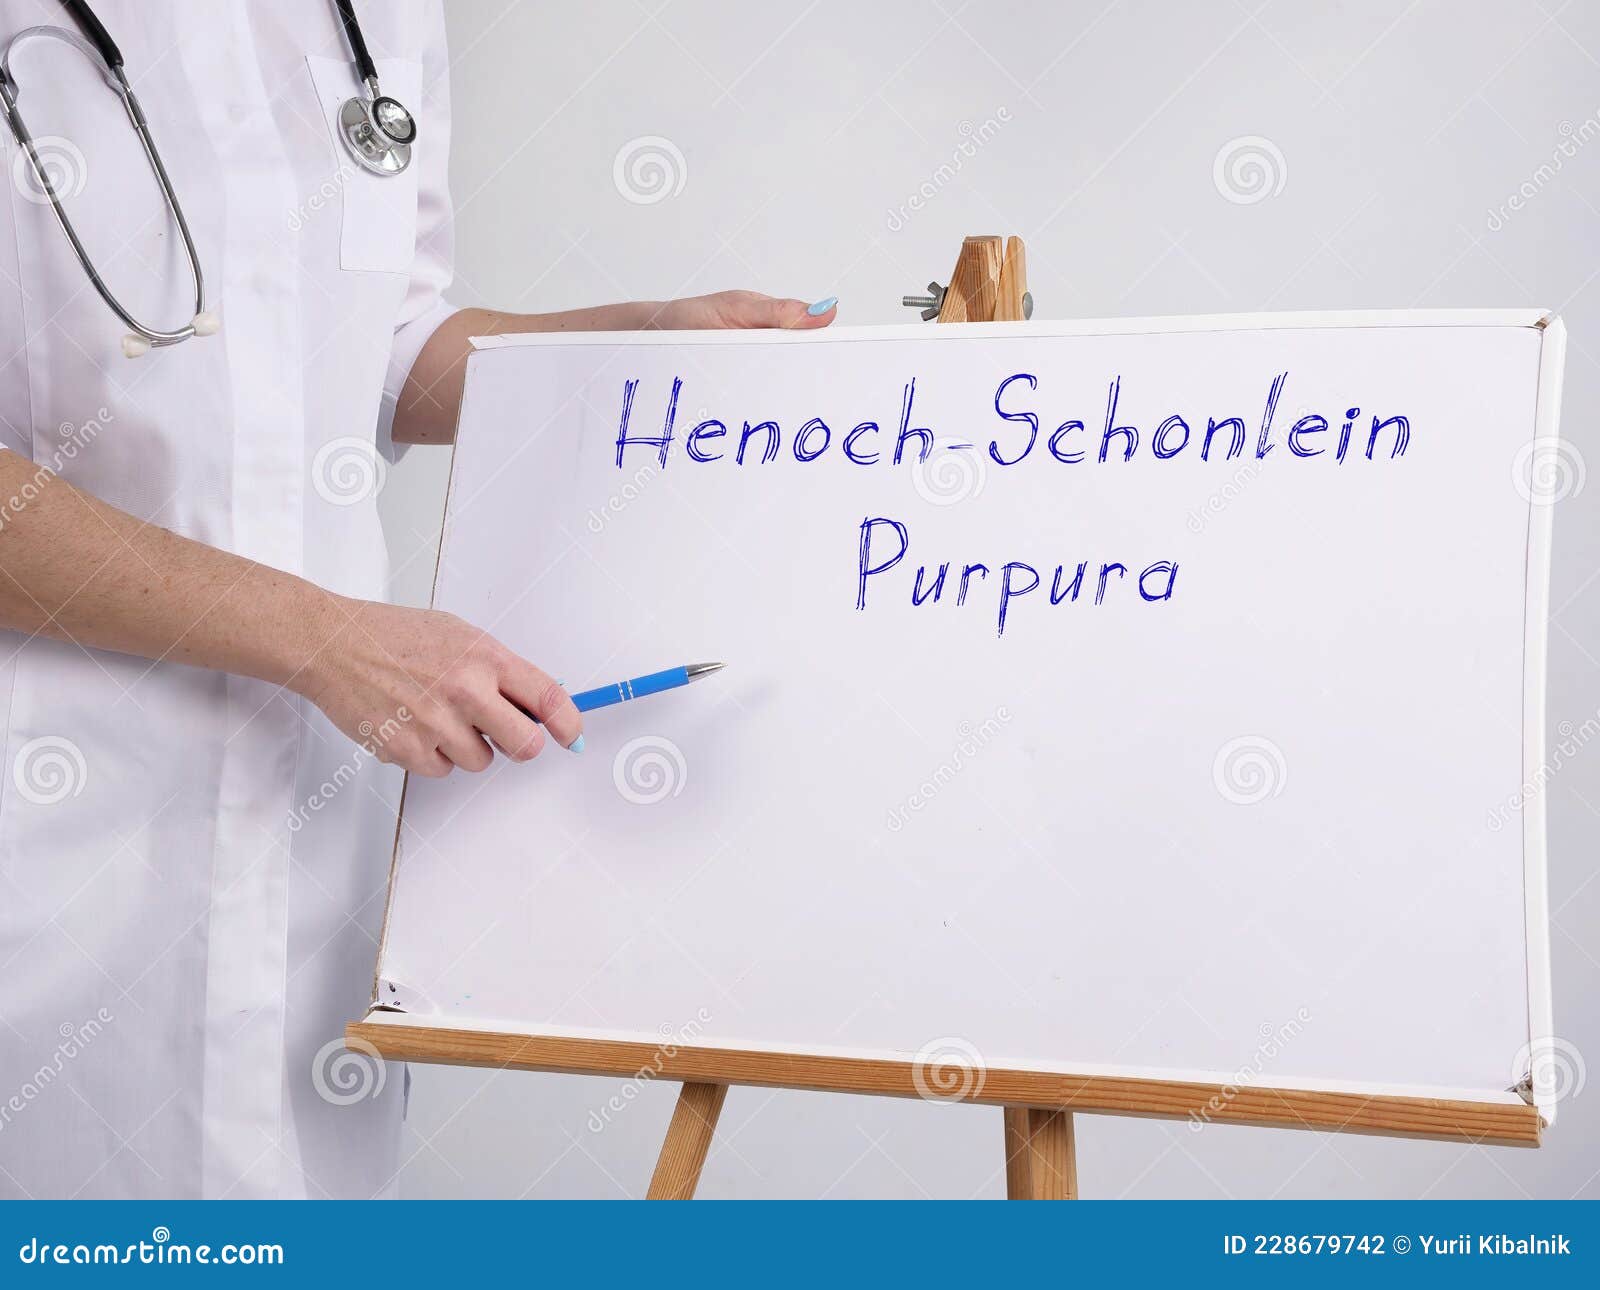 healthcare concept about henoch-schonlein purpura with phrase on the sheet